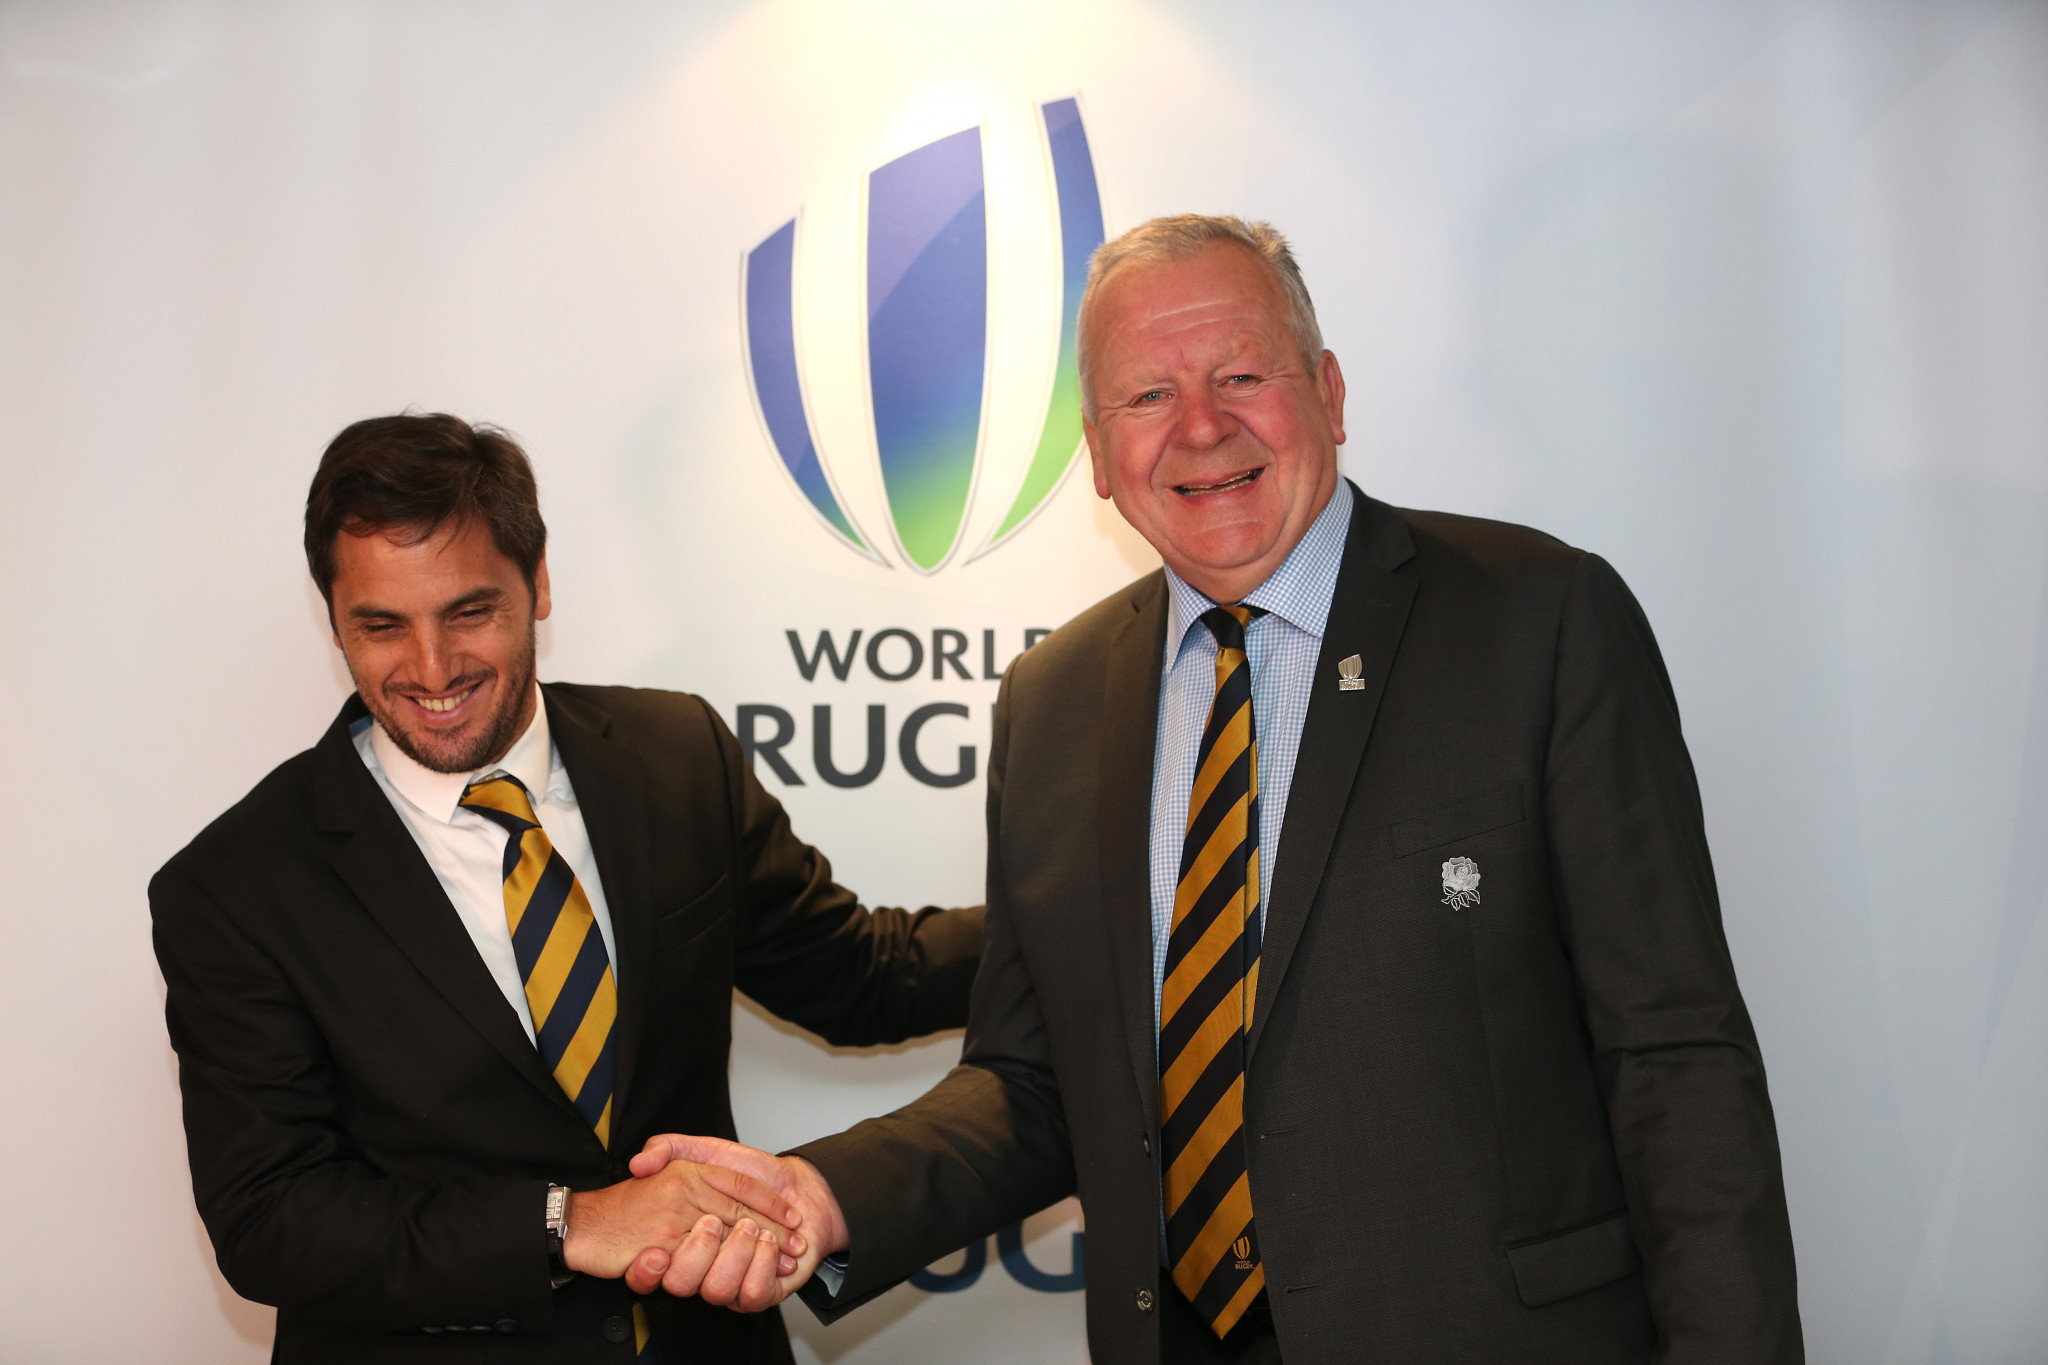 Agustín Pichot is taking on Sir Bill Beaumont in the World Rugby leadership race ©Getty Images